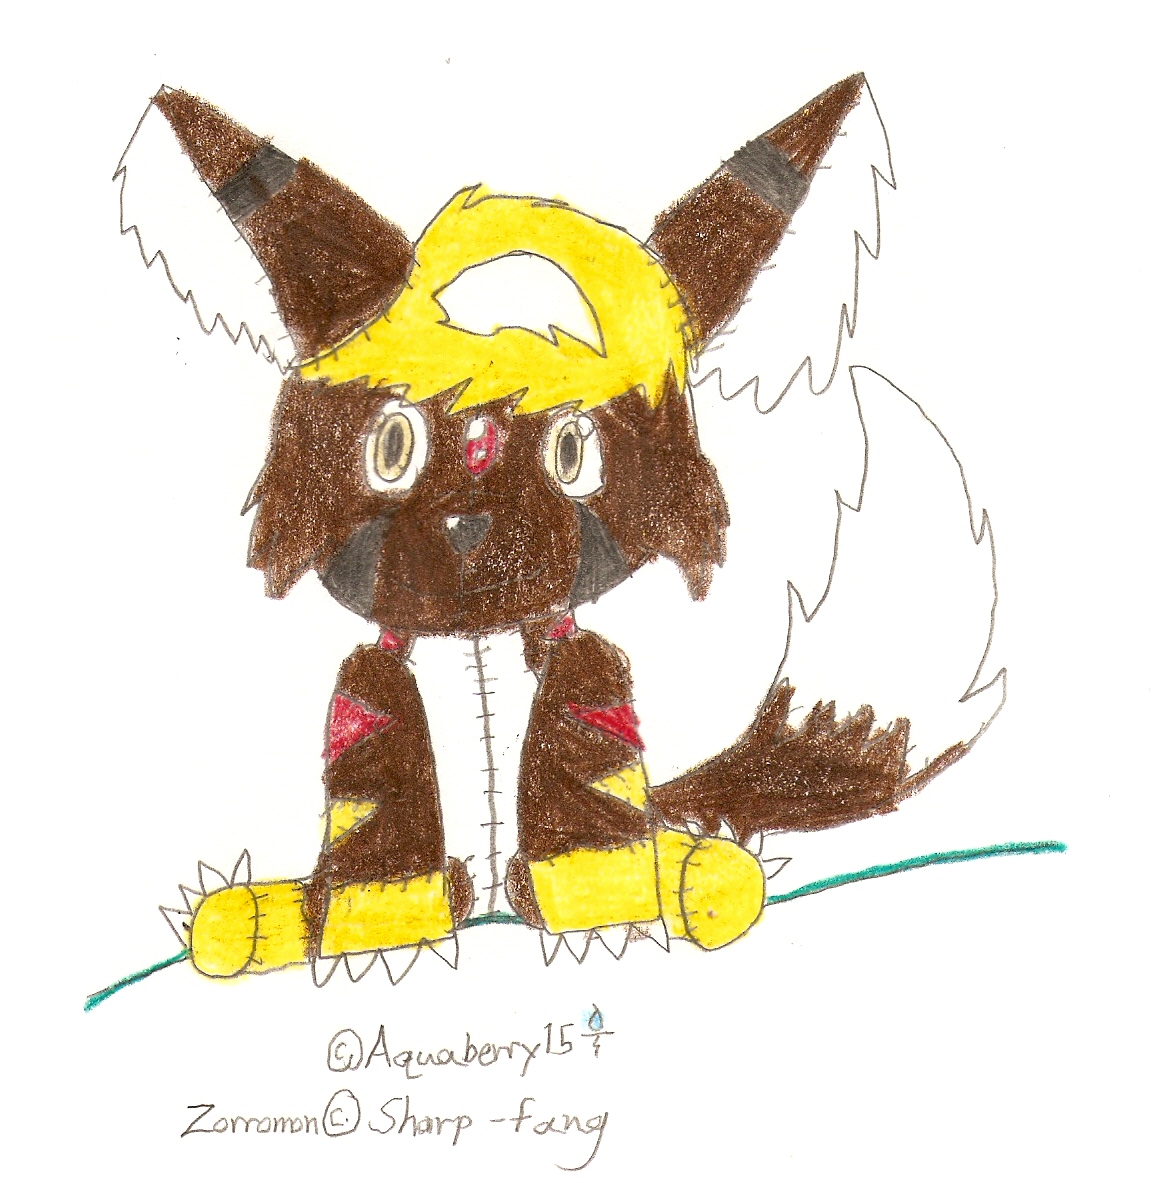 Zorromon Plushie *Request for Sharp-fang* by Aquaberry15